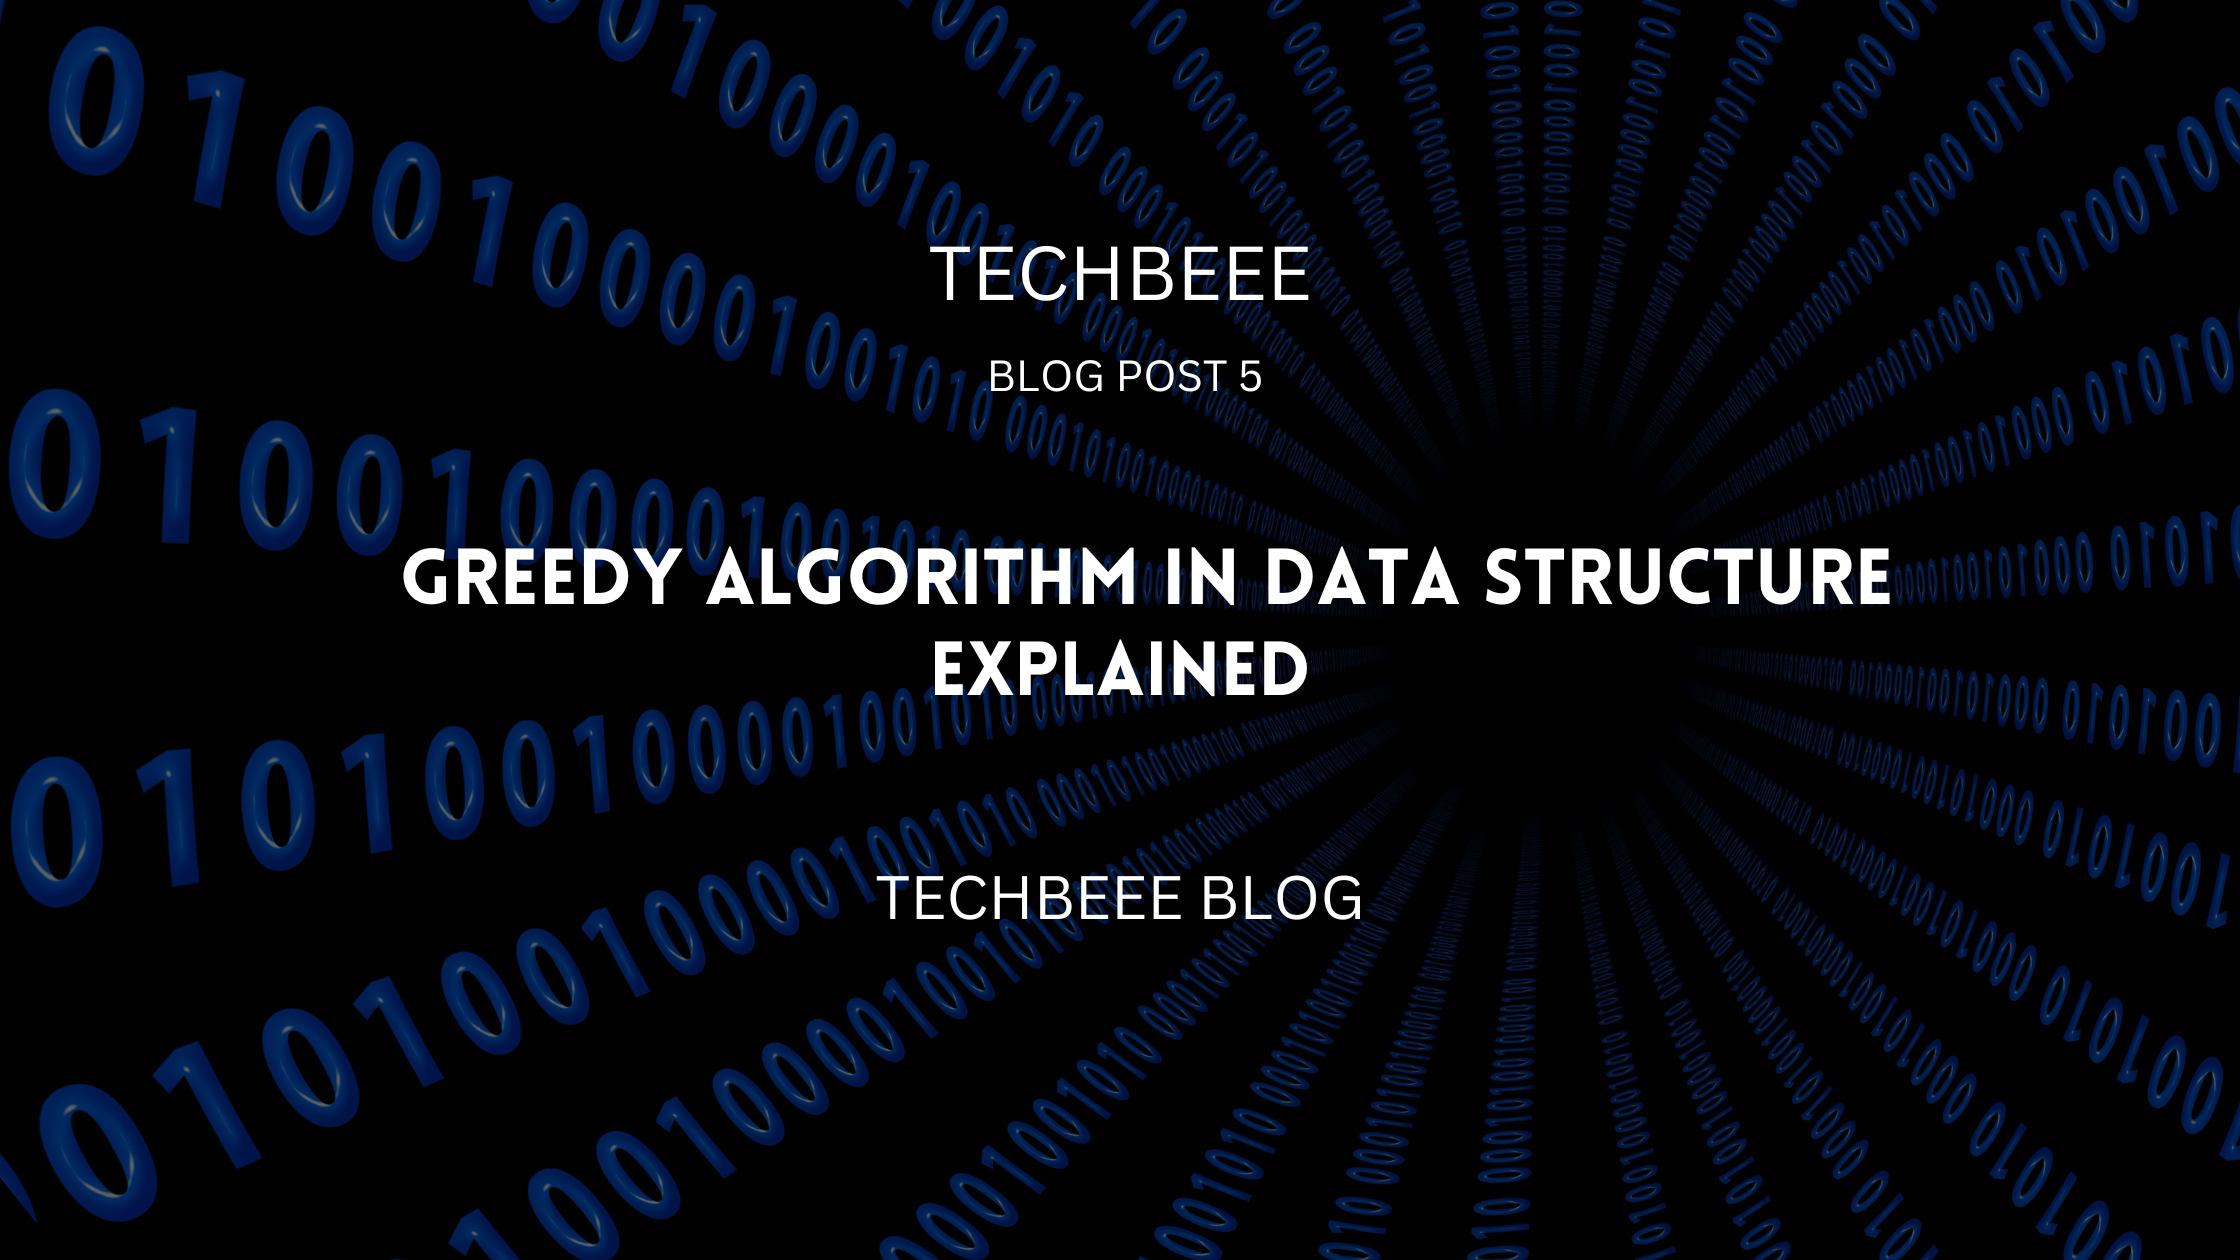 Greedy Algorithm in Data Structures